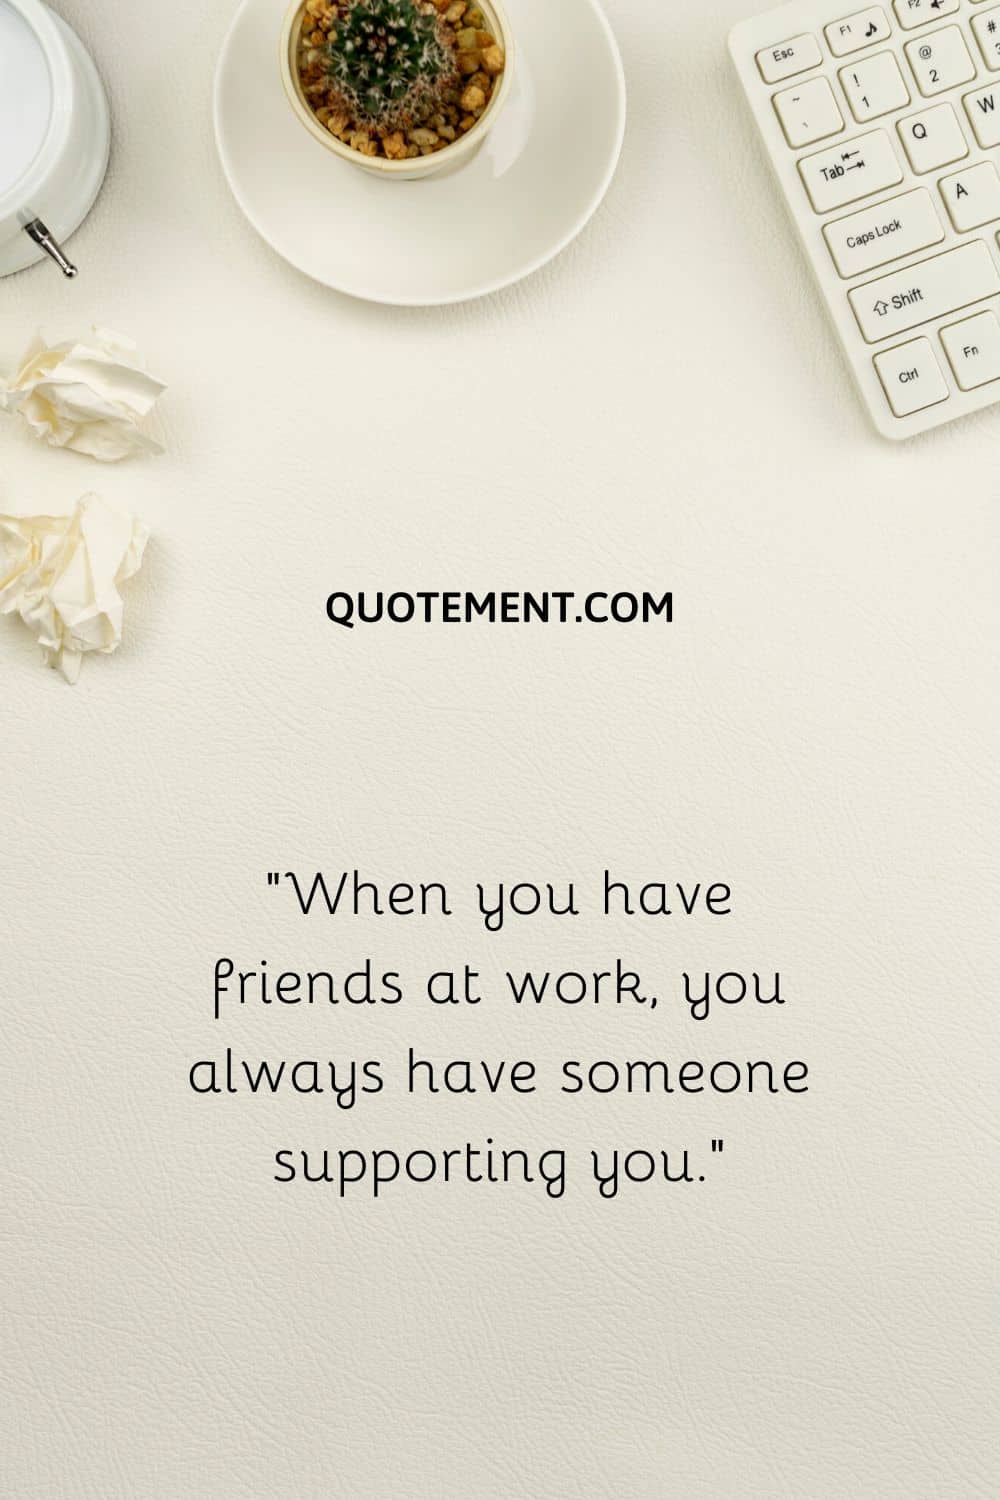 “When you have friends at work, you always have someone supporting you.”